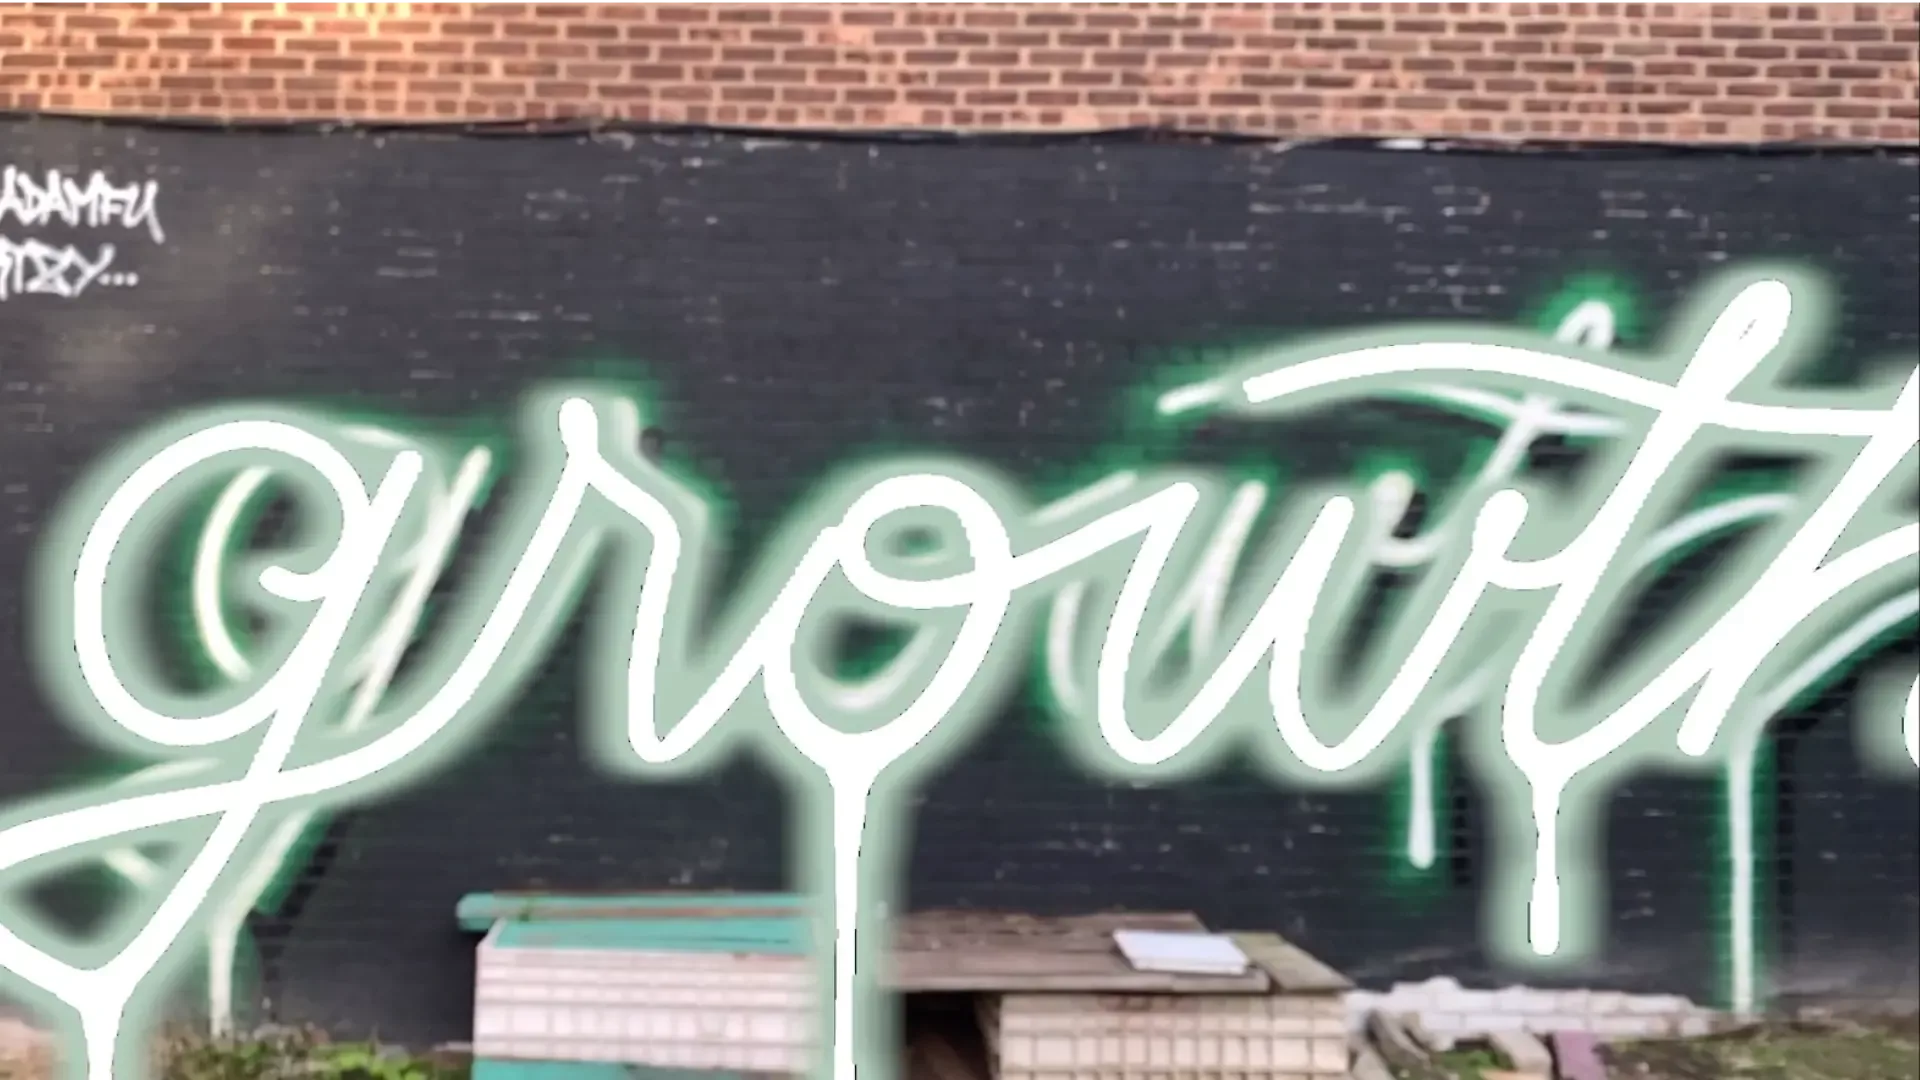 <p>A graffiti with of the word "Growth" with an augmented reality 3D model overlayed over it;. The 3D model makes use of post-processing techniques to become illuminated with green neon glow.</p>